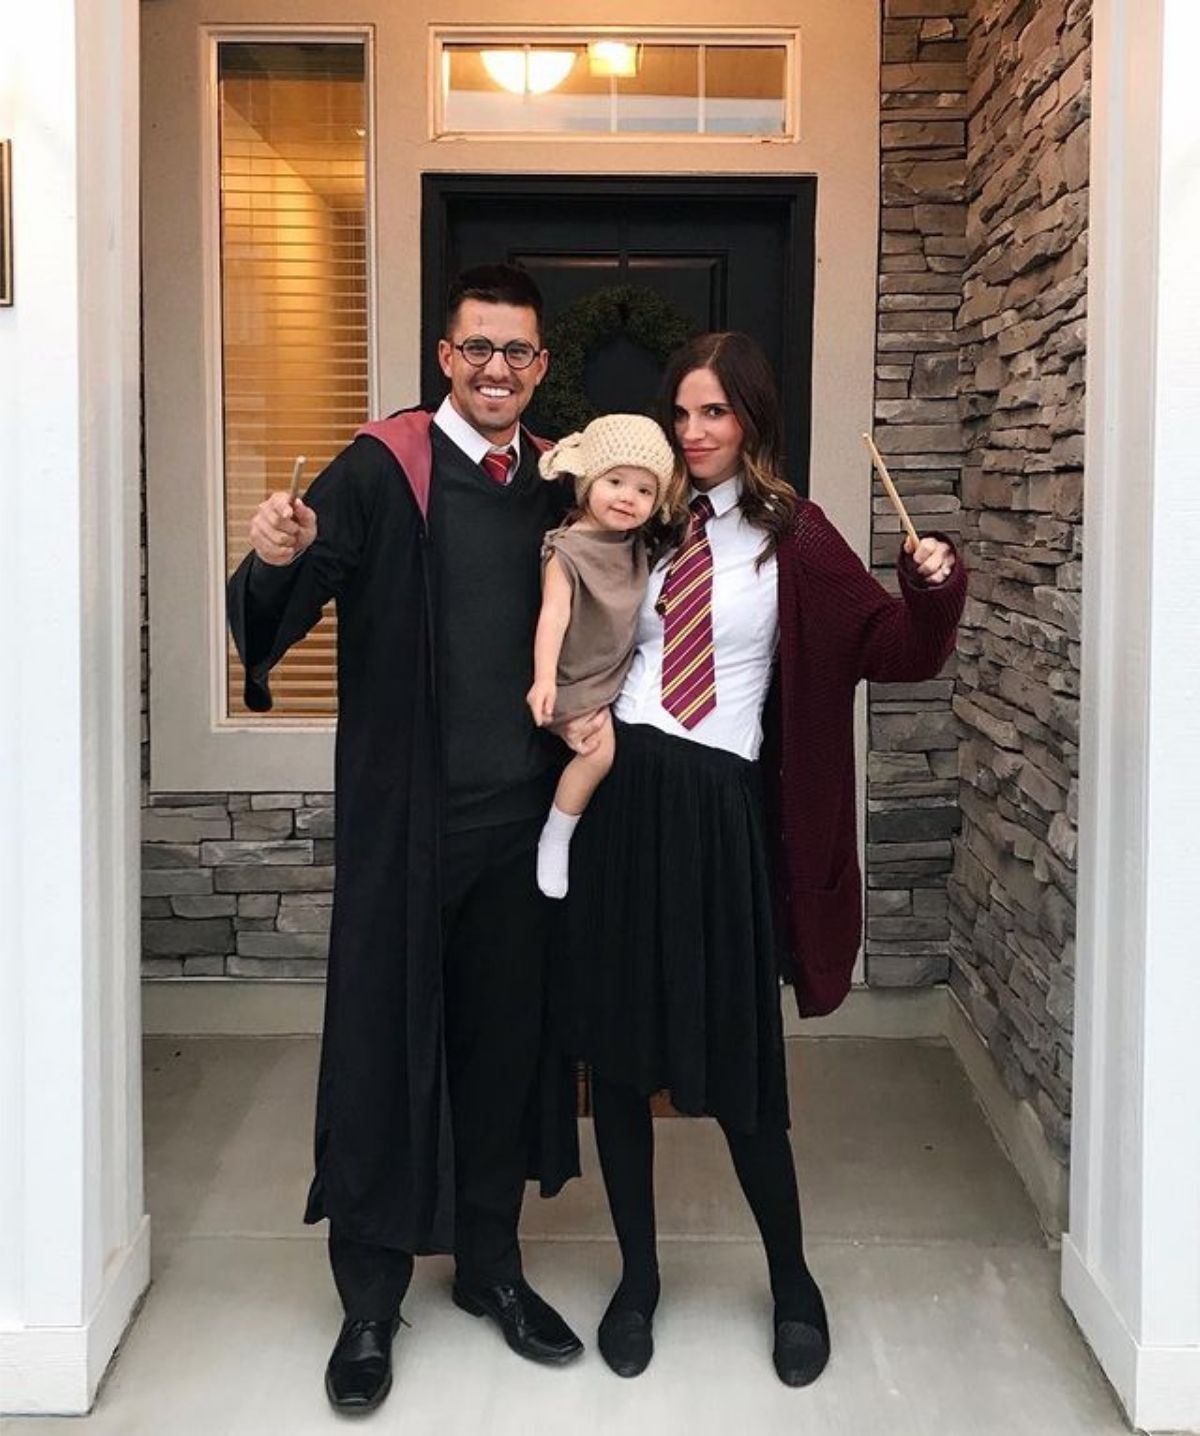 Harry Potter costumes